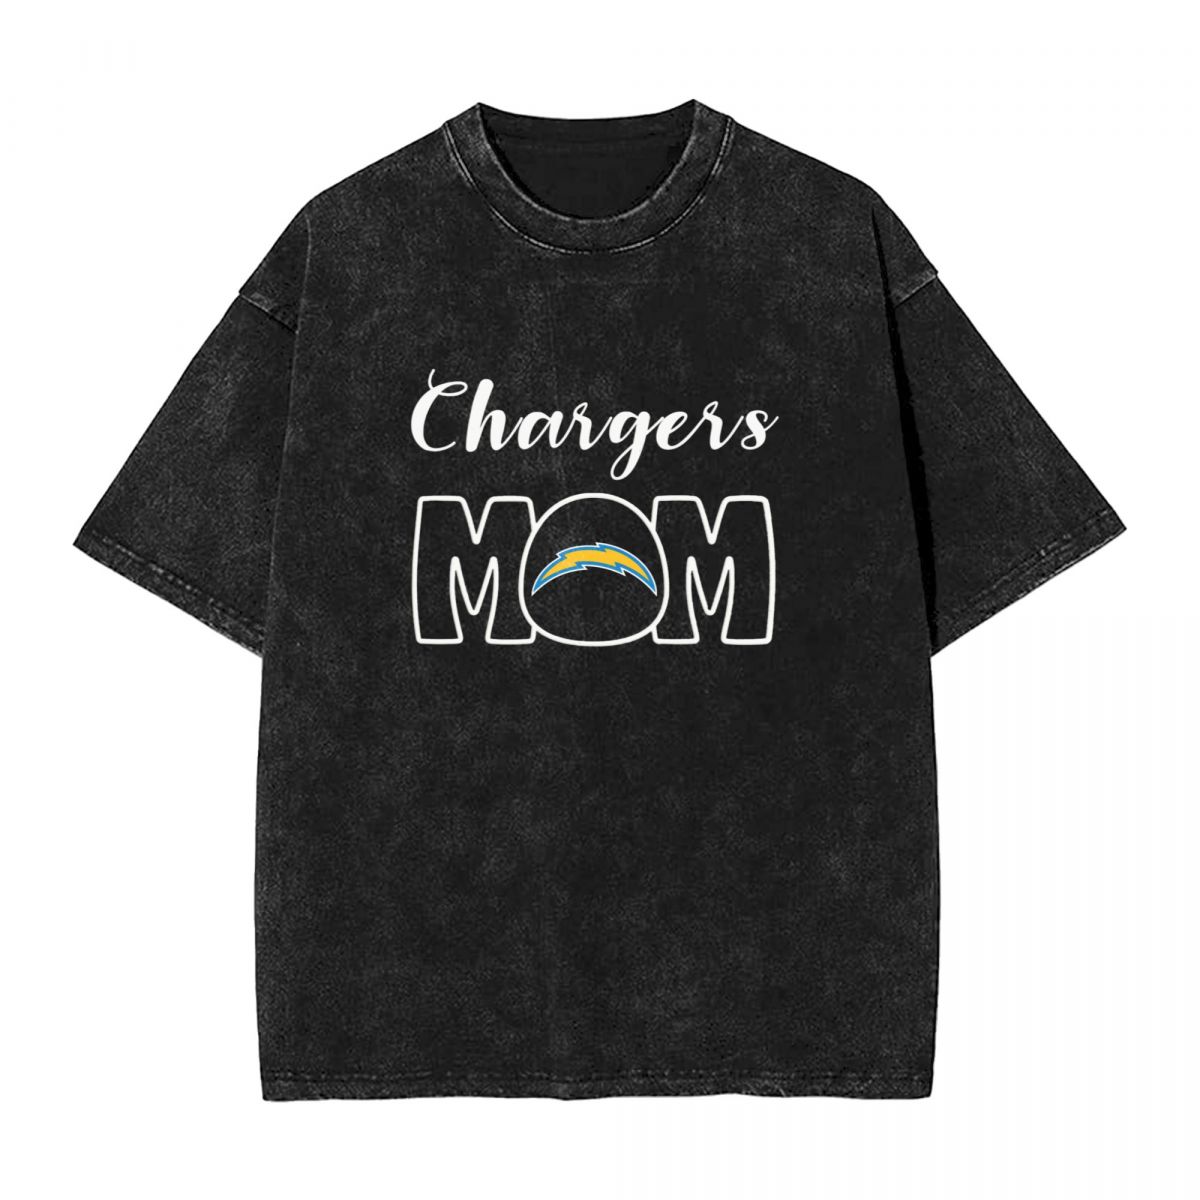 Los Angeles Chargers Mom Printed Vintage Men's Oversized T-Shirt